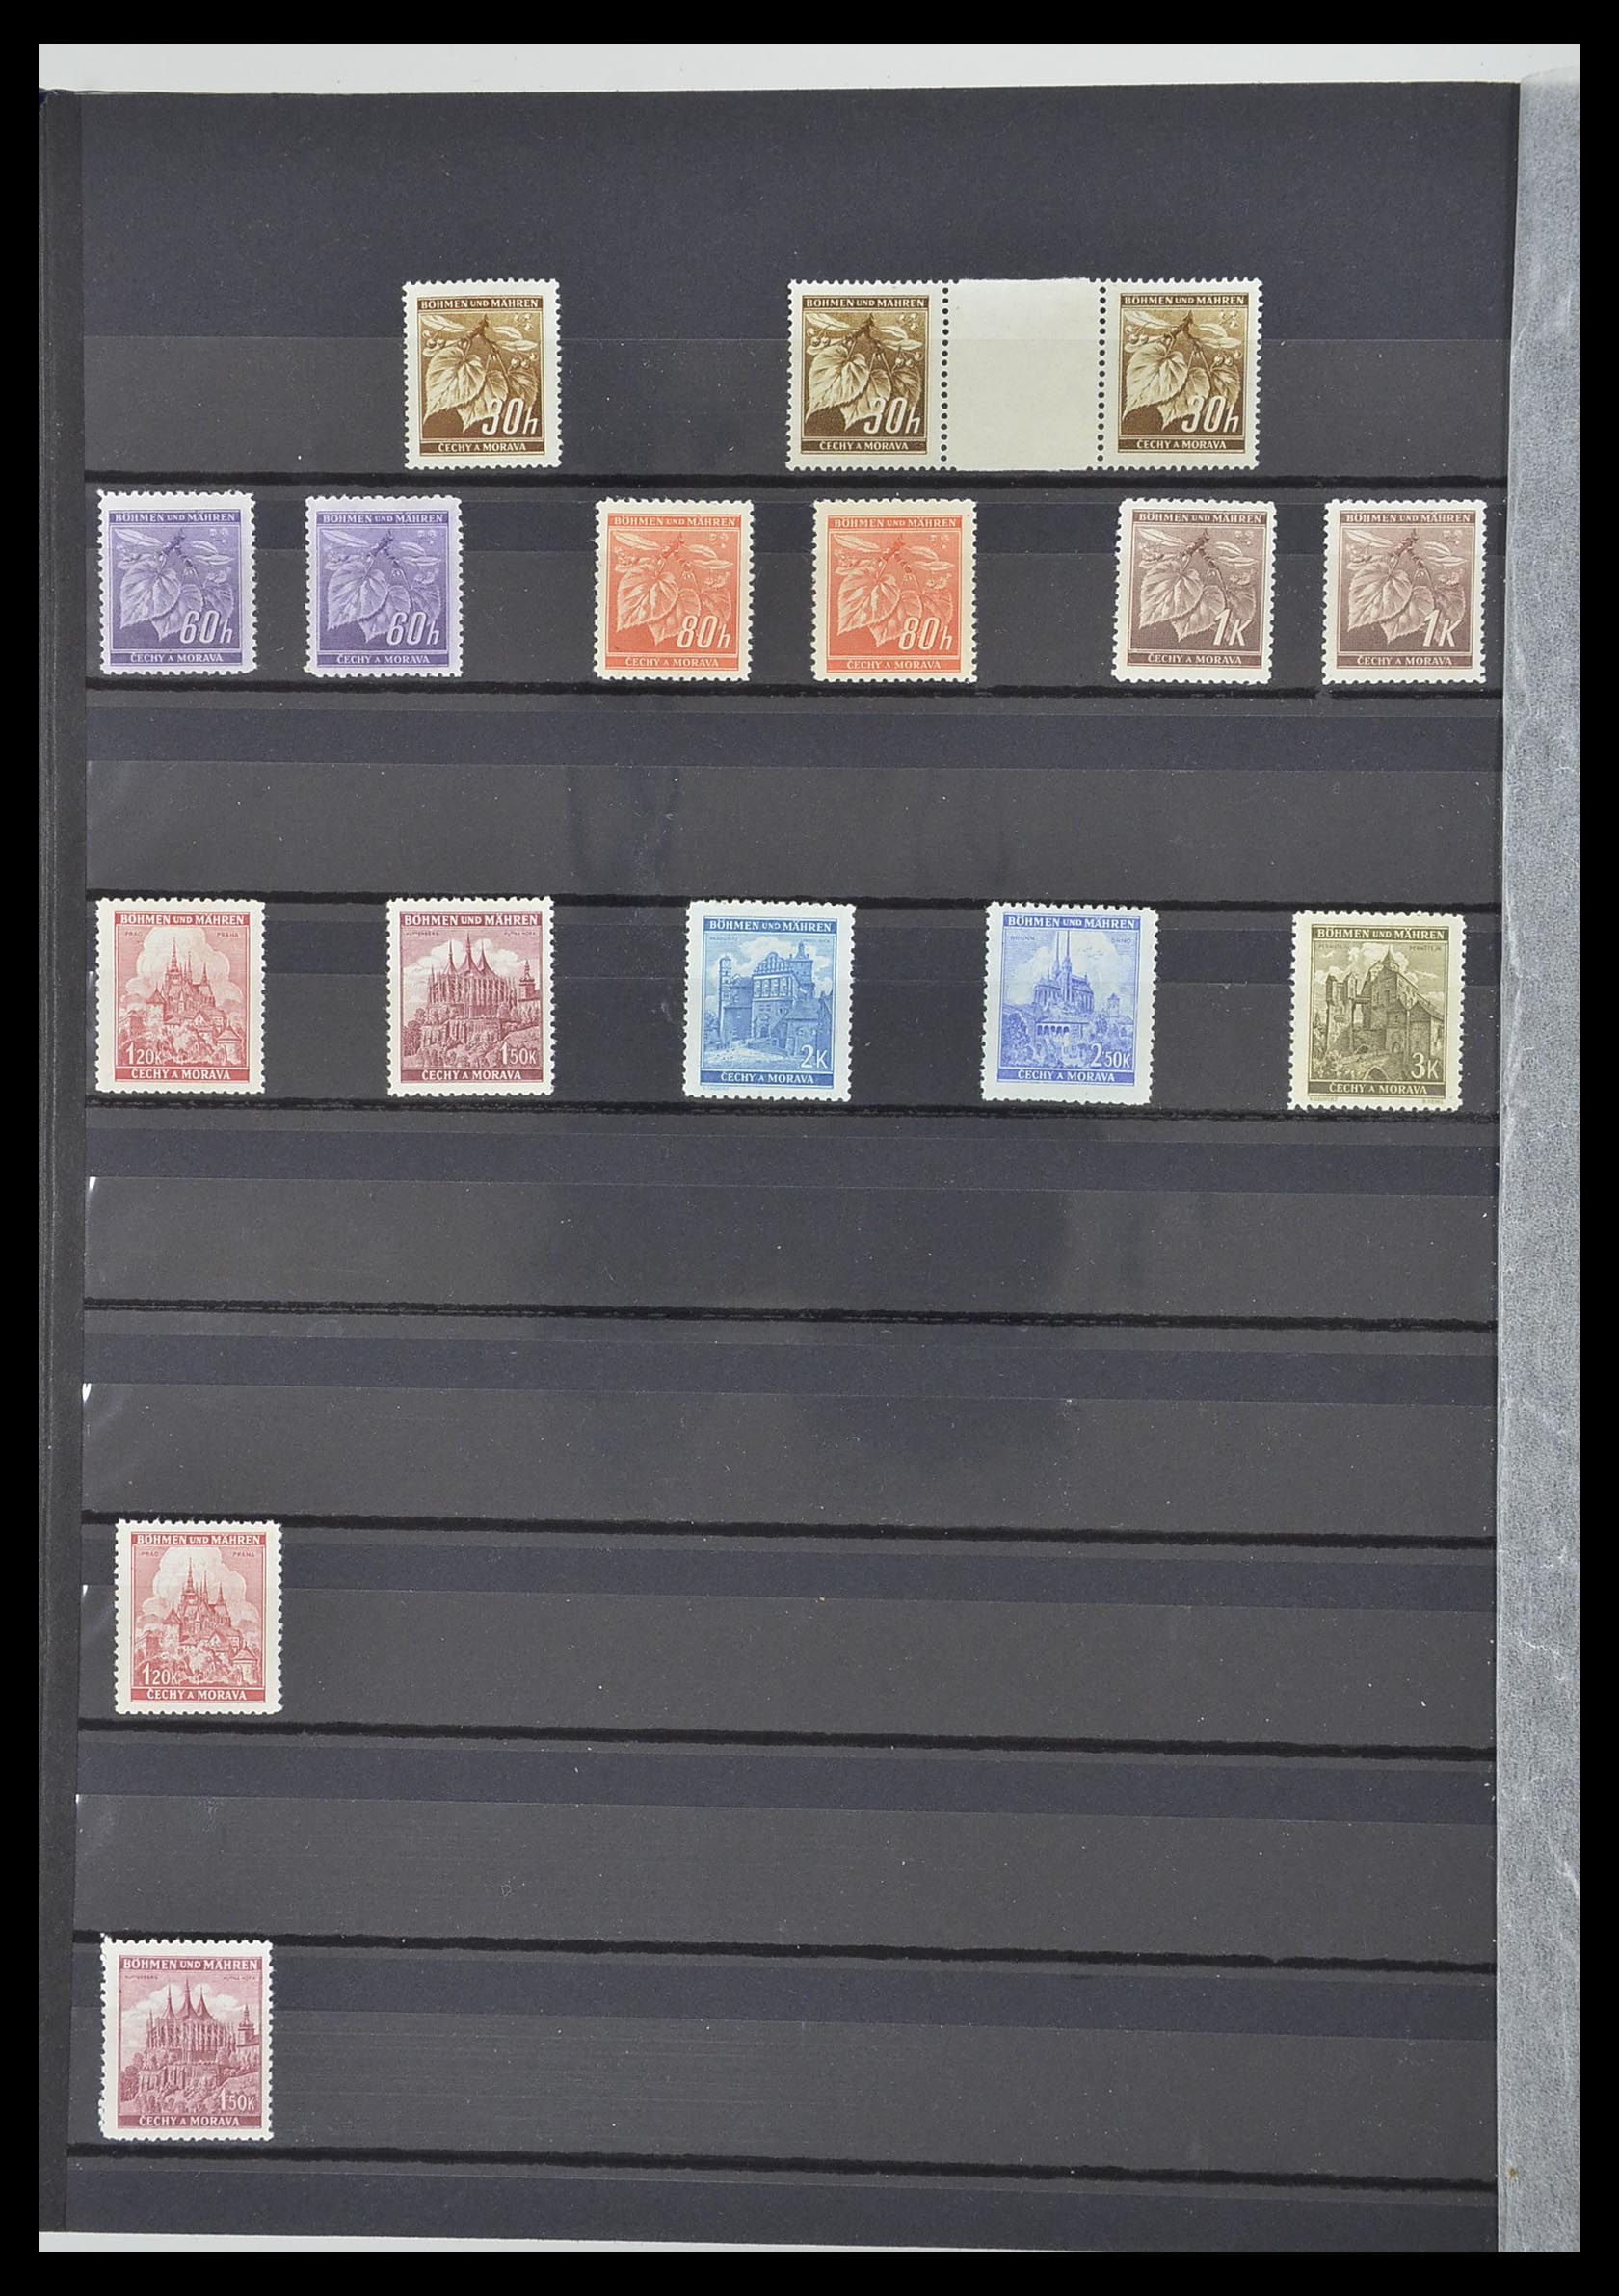 33553 059 - Stamp collection 33553 German territories and occupations 1939-1948.